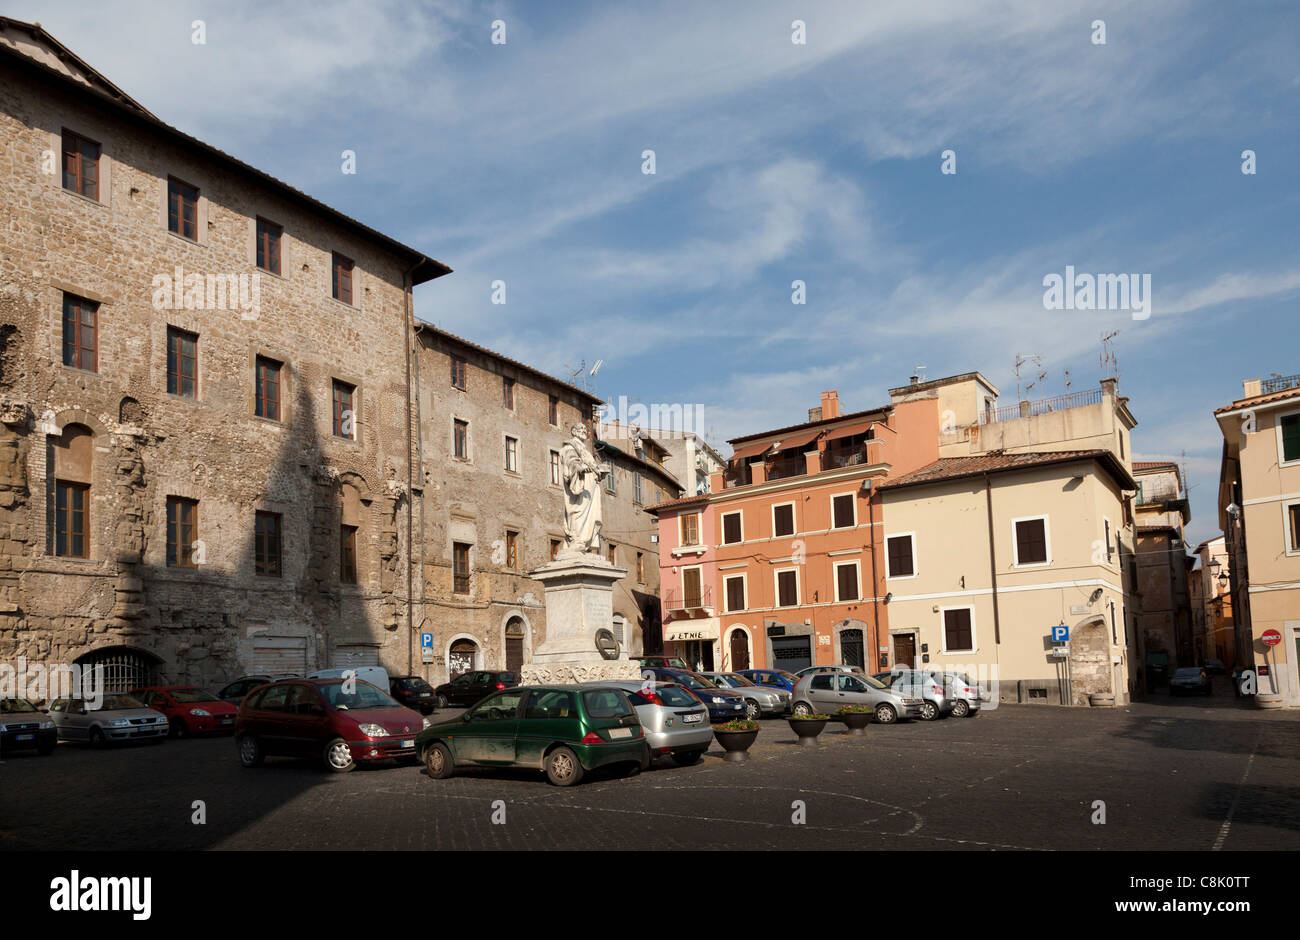 City Of Palestrina High Resolution Stock Photography and Images - Alamy